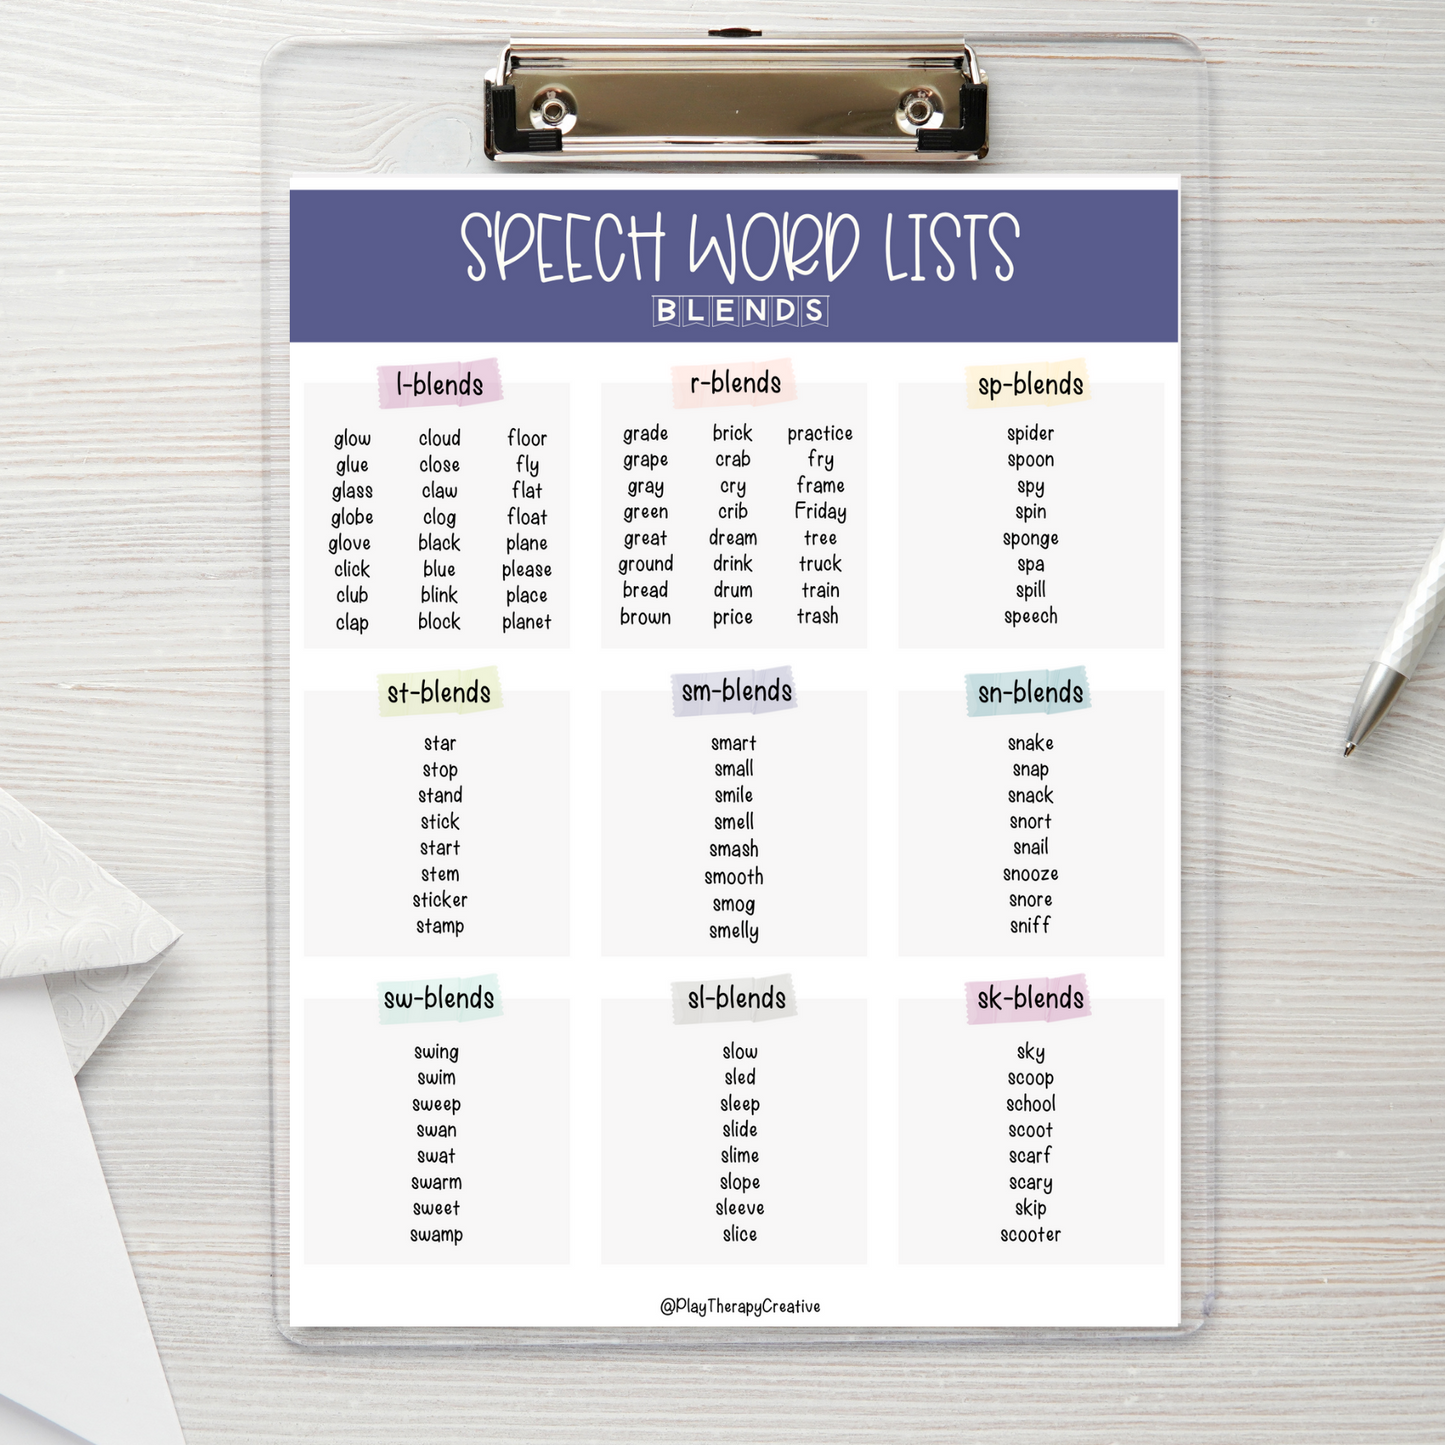 Articulation Word Lists